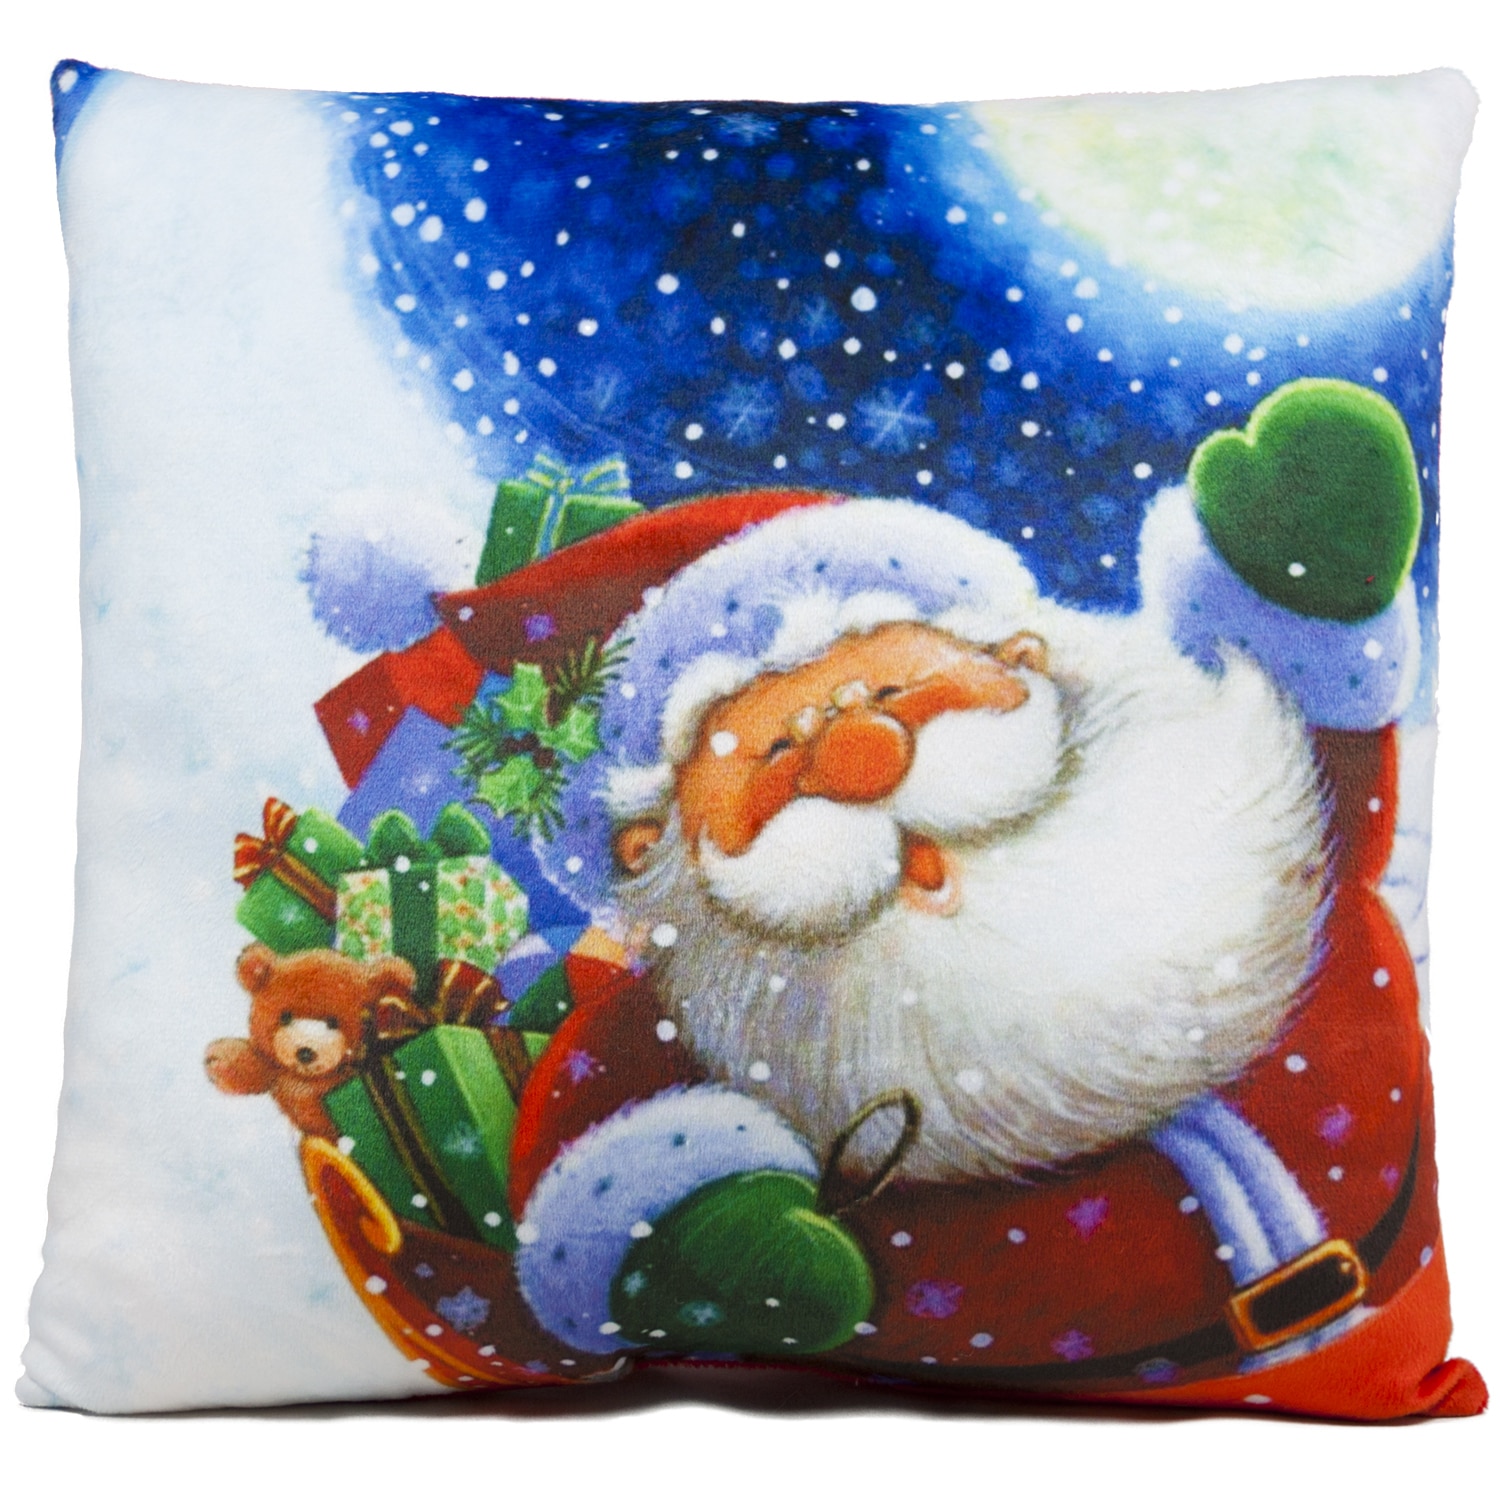 Christmas pillow - Santa Claus with gifts